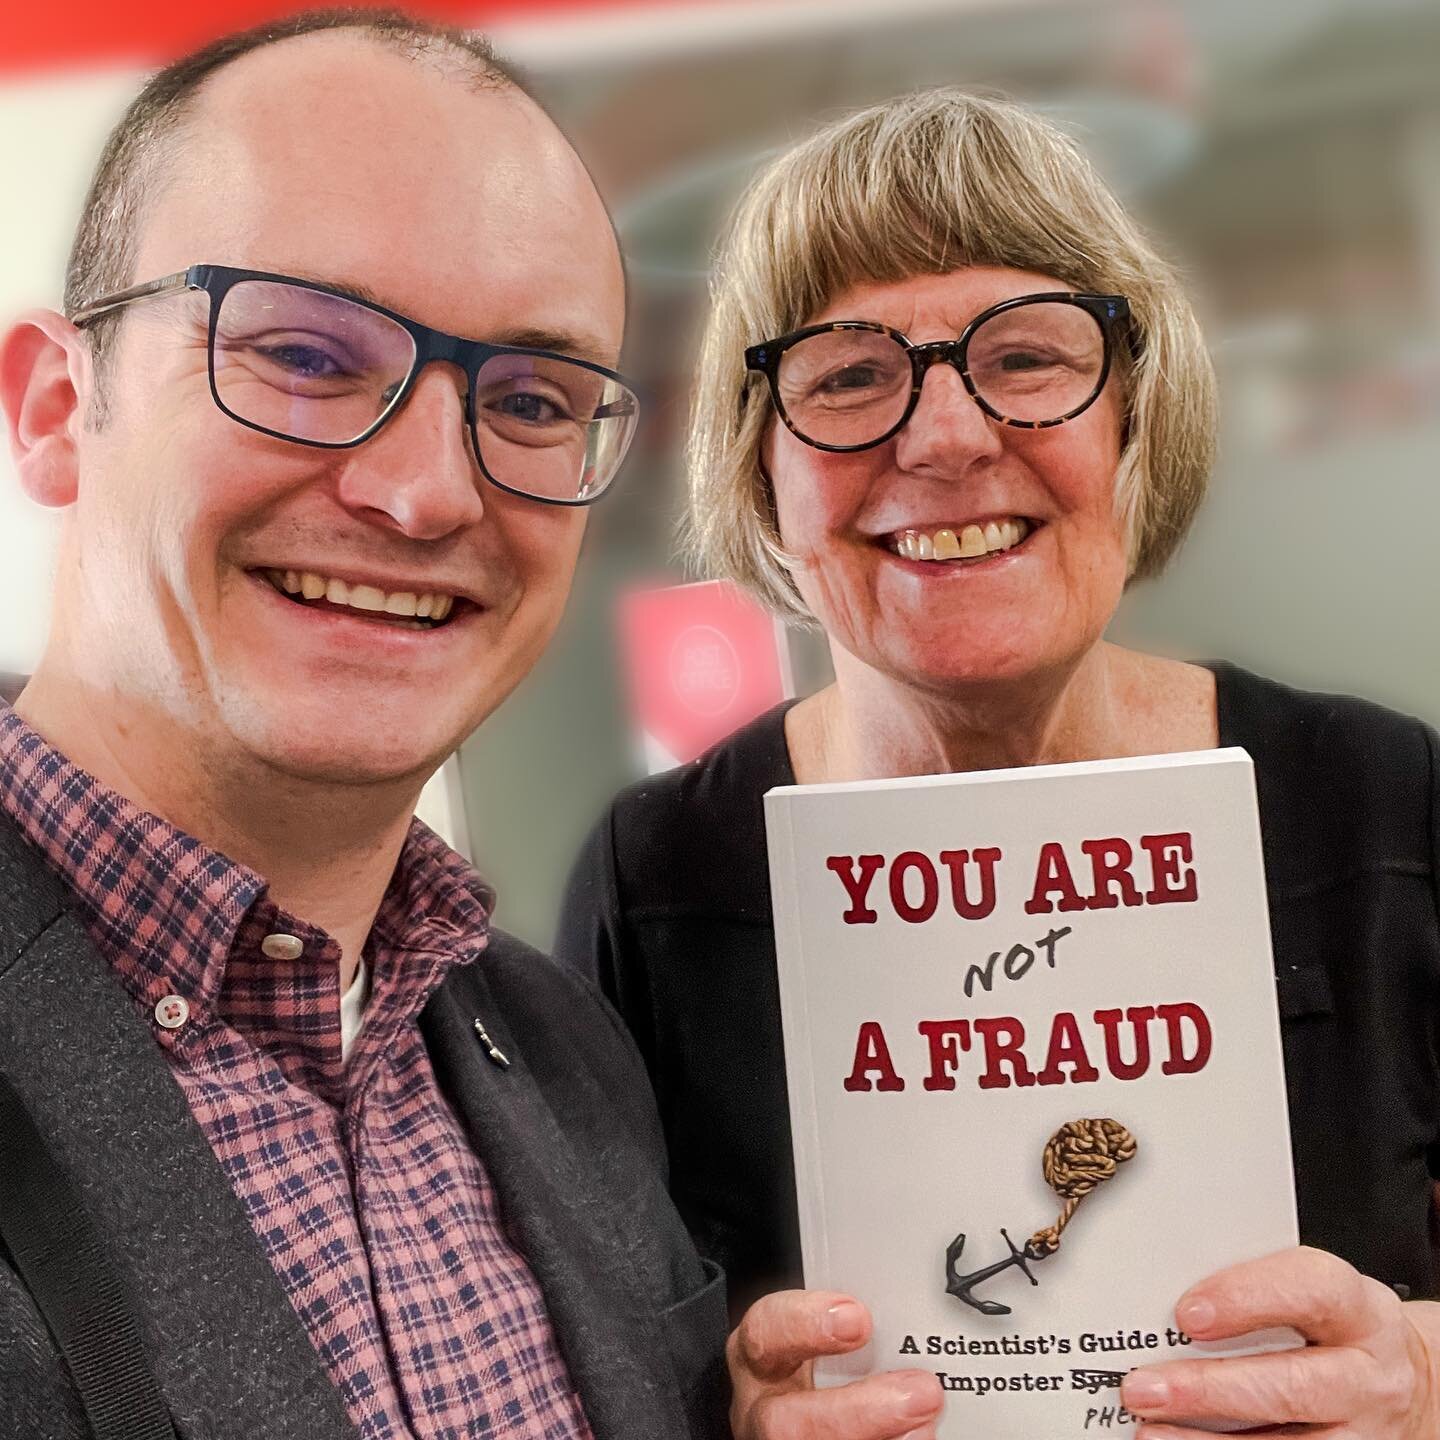 Coming full circle on the #YouAreNotAFraud book launch, I met with Aileen on her tea break at work. 

Back in Oct/Nov 2022, she very patiently helped post 50 copies of the book all over the world, and kindly took interest while we scanned and stamped